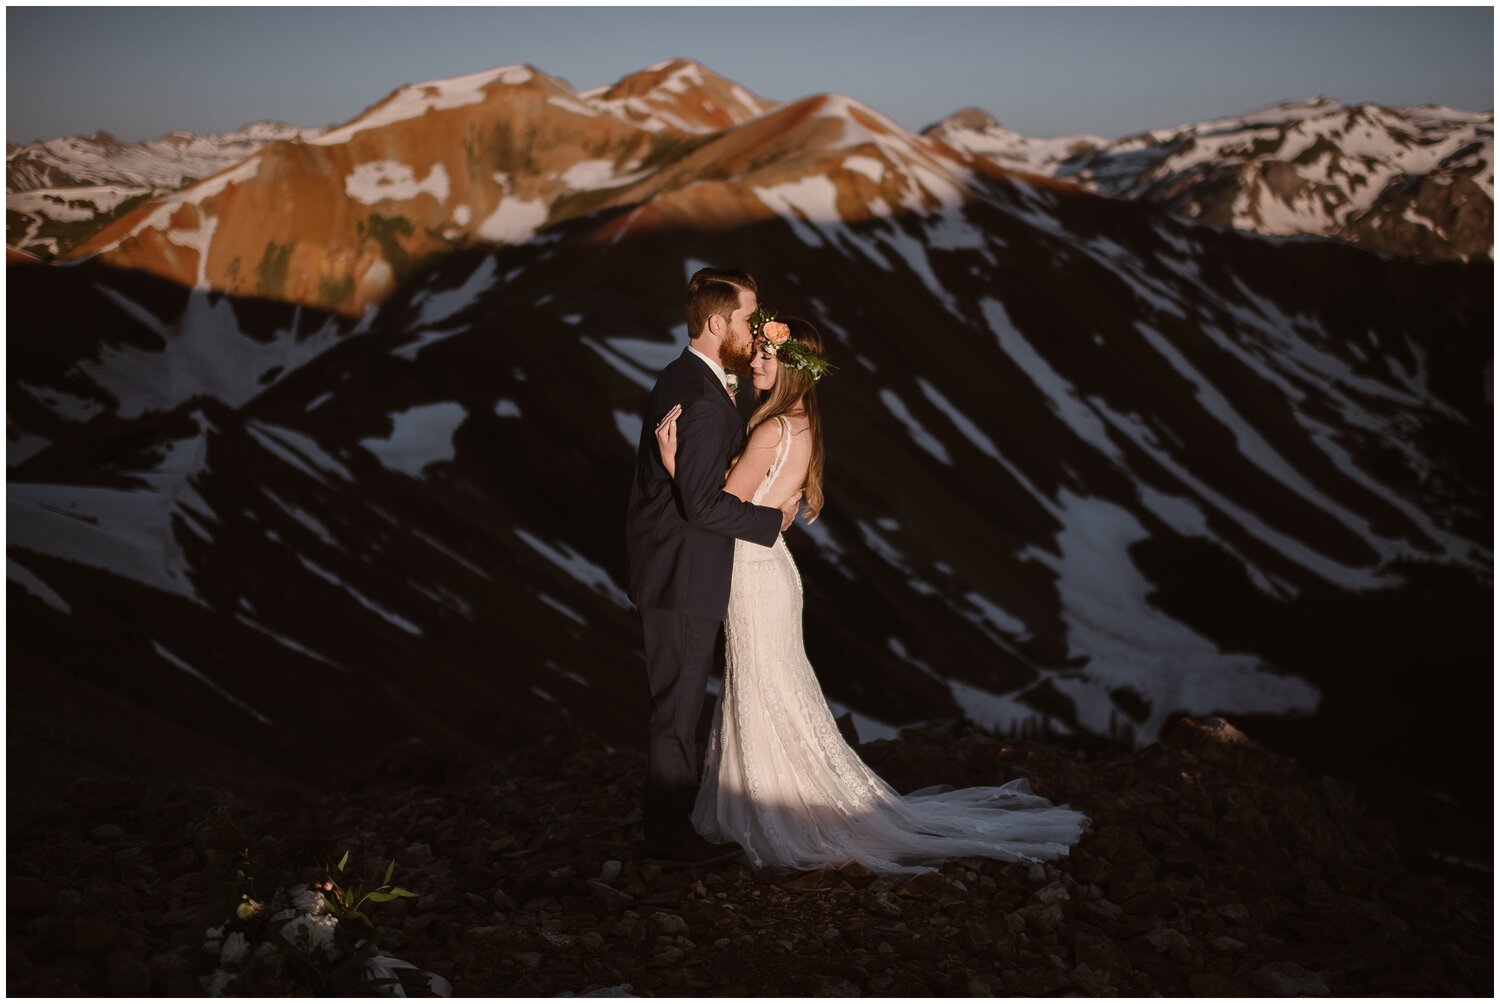 Bride and groom embrace, as groom kisses bride on the cheek. Snow on the mountains behind them. 